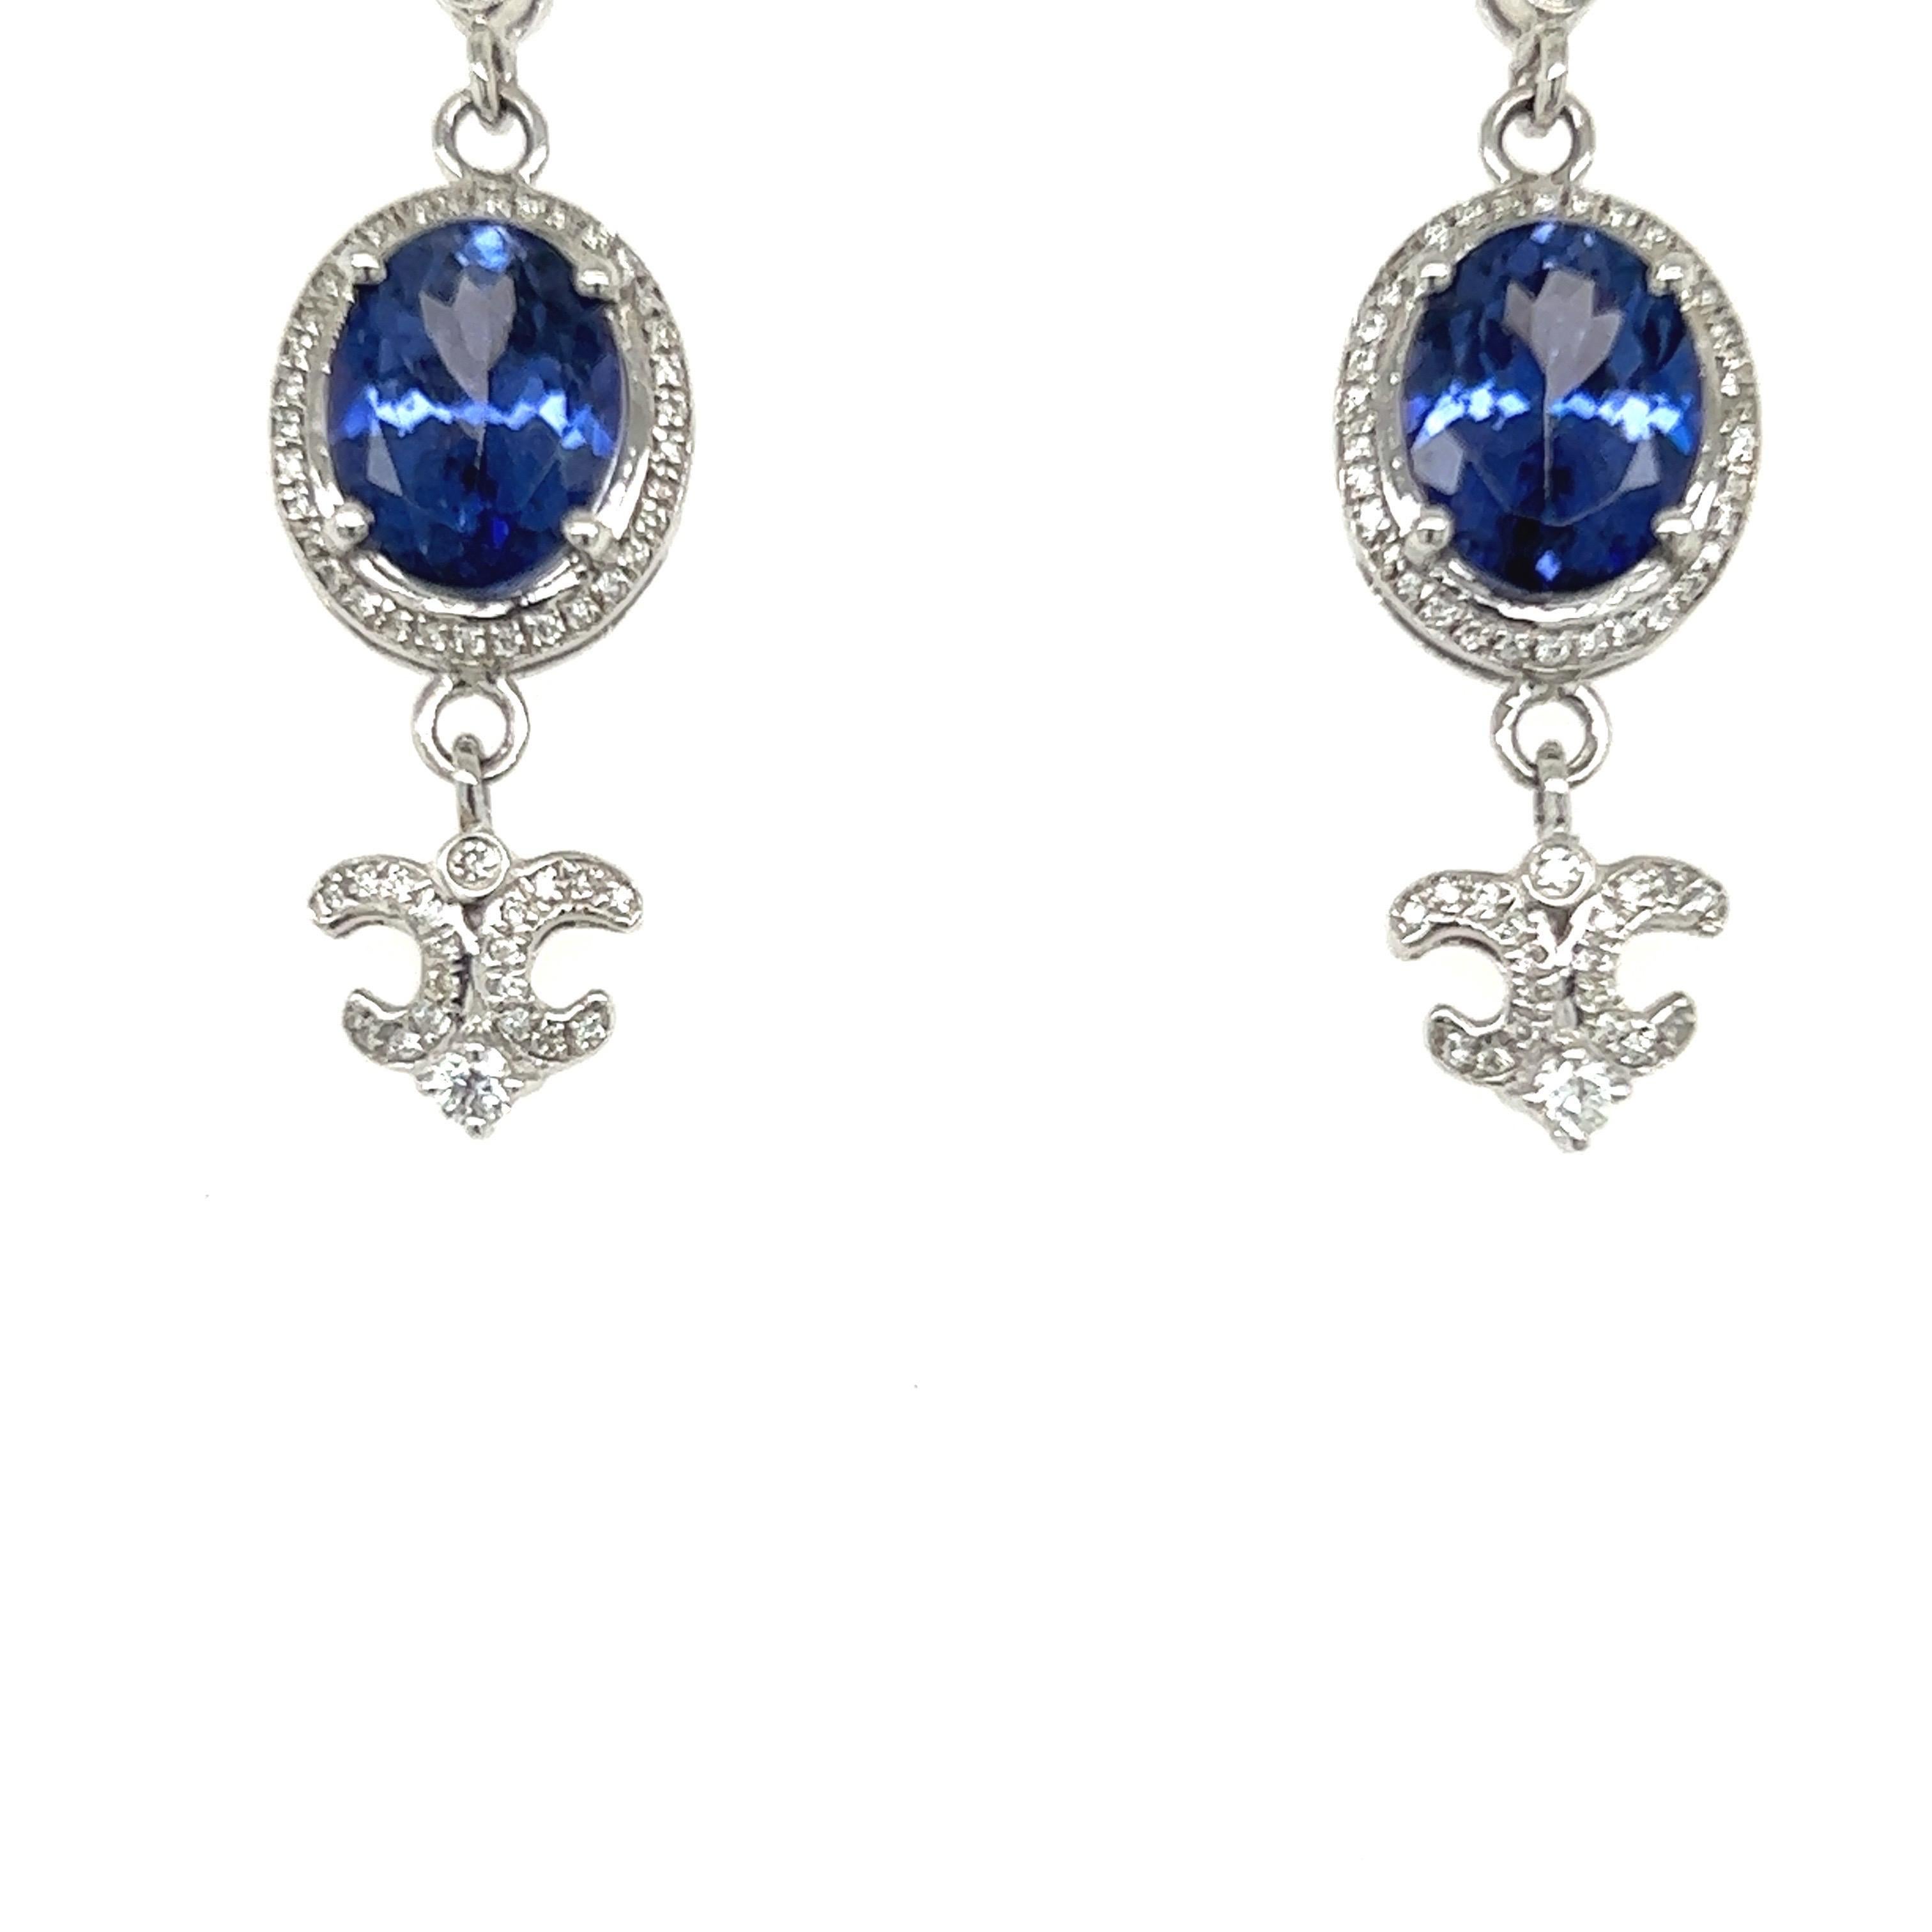 Stunning Tanzanite dangling earrings. High brilliance, purplish blue, oval faceted natural 4.08 carats tanzanite mounted in high profile with four bead prongs. Accented with round brilliant cut diamonds. Handcrafted design is set in 14 karat white